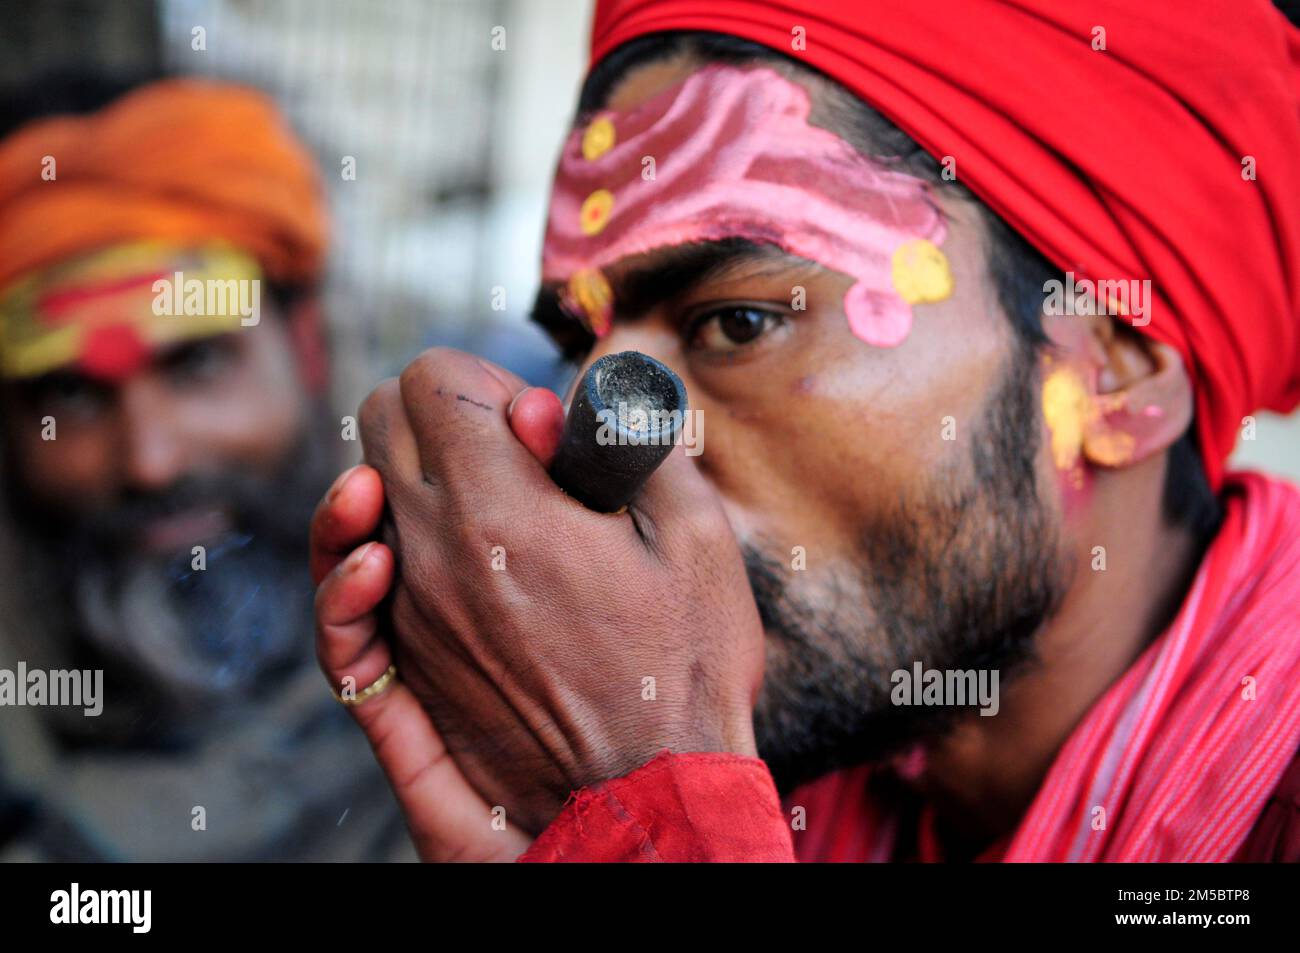 A Shaivite sadhu smoking chillum on the Mallick Ghat by the Hooghly river in Kolkata, India. Stock Photo